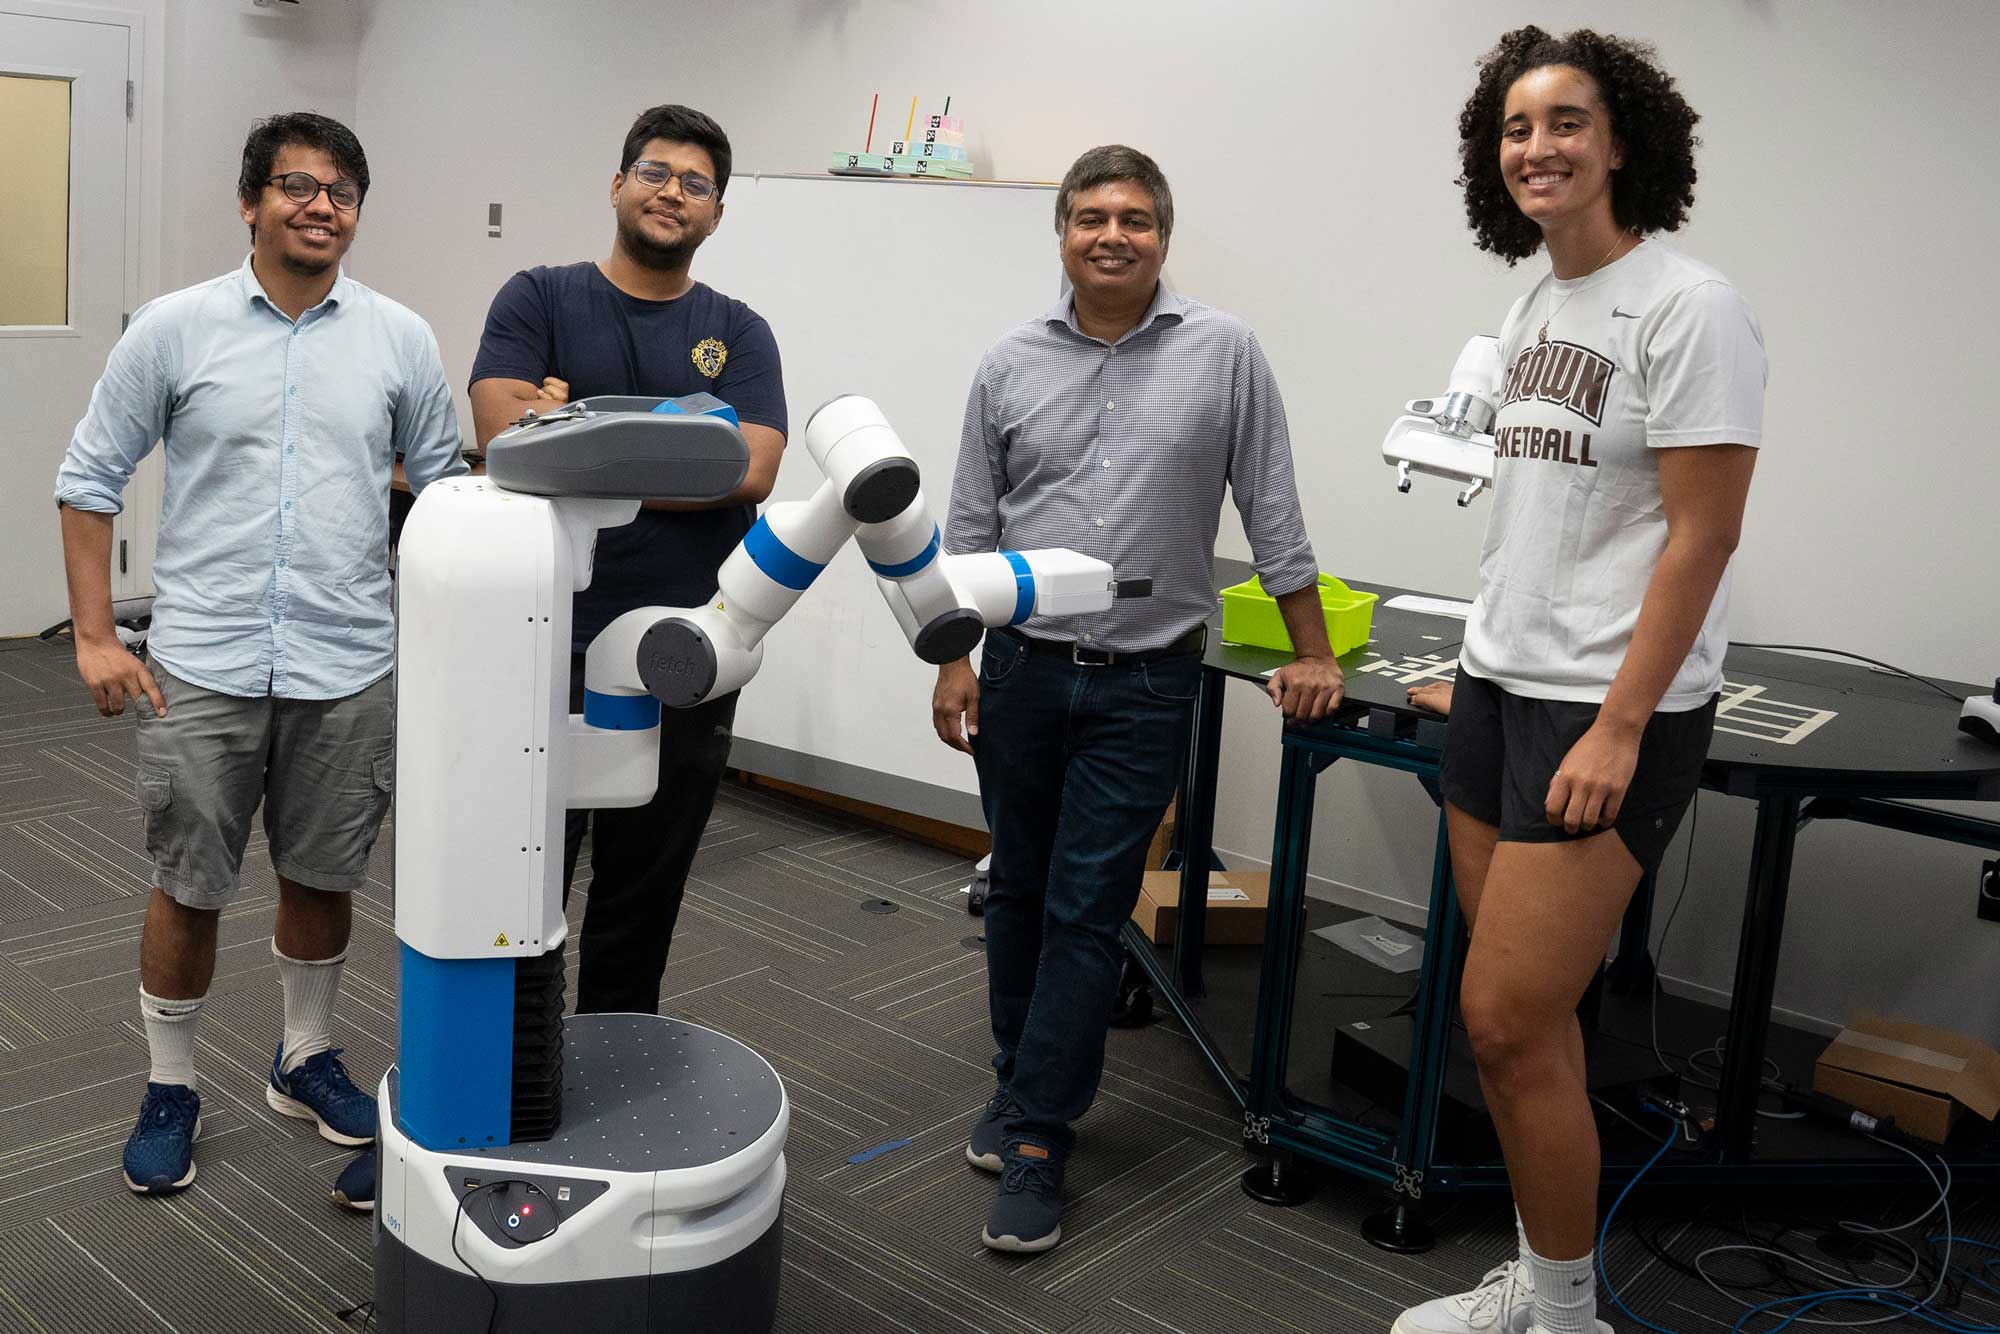 From left to right, Mohammad Samin Yasar, Sujan Sarker, Tariq Iqbal and Haley Green in the lab with a robot